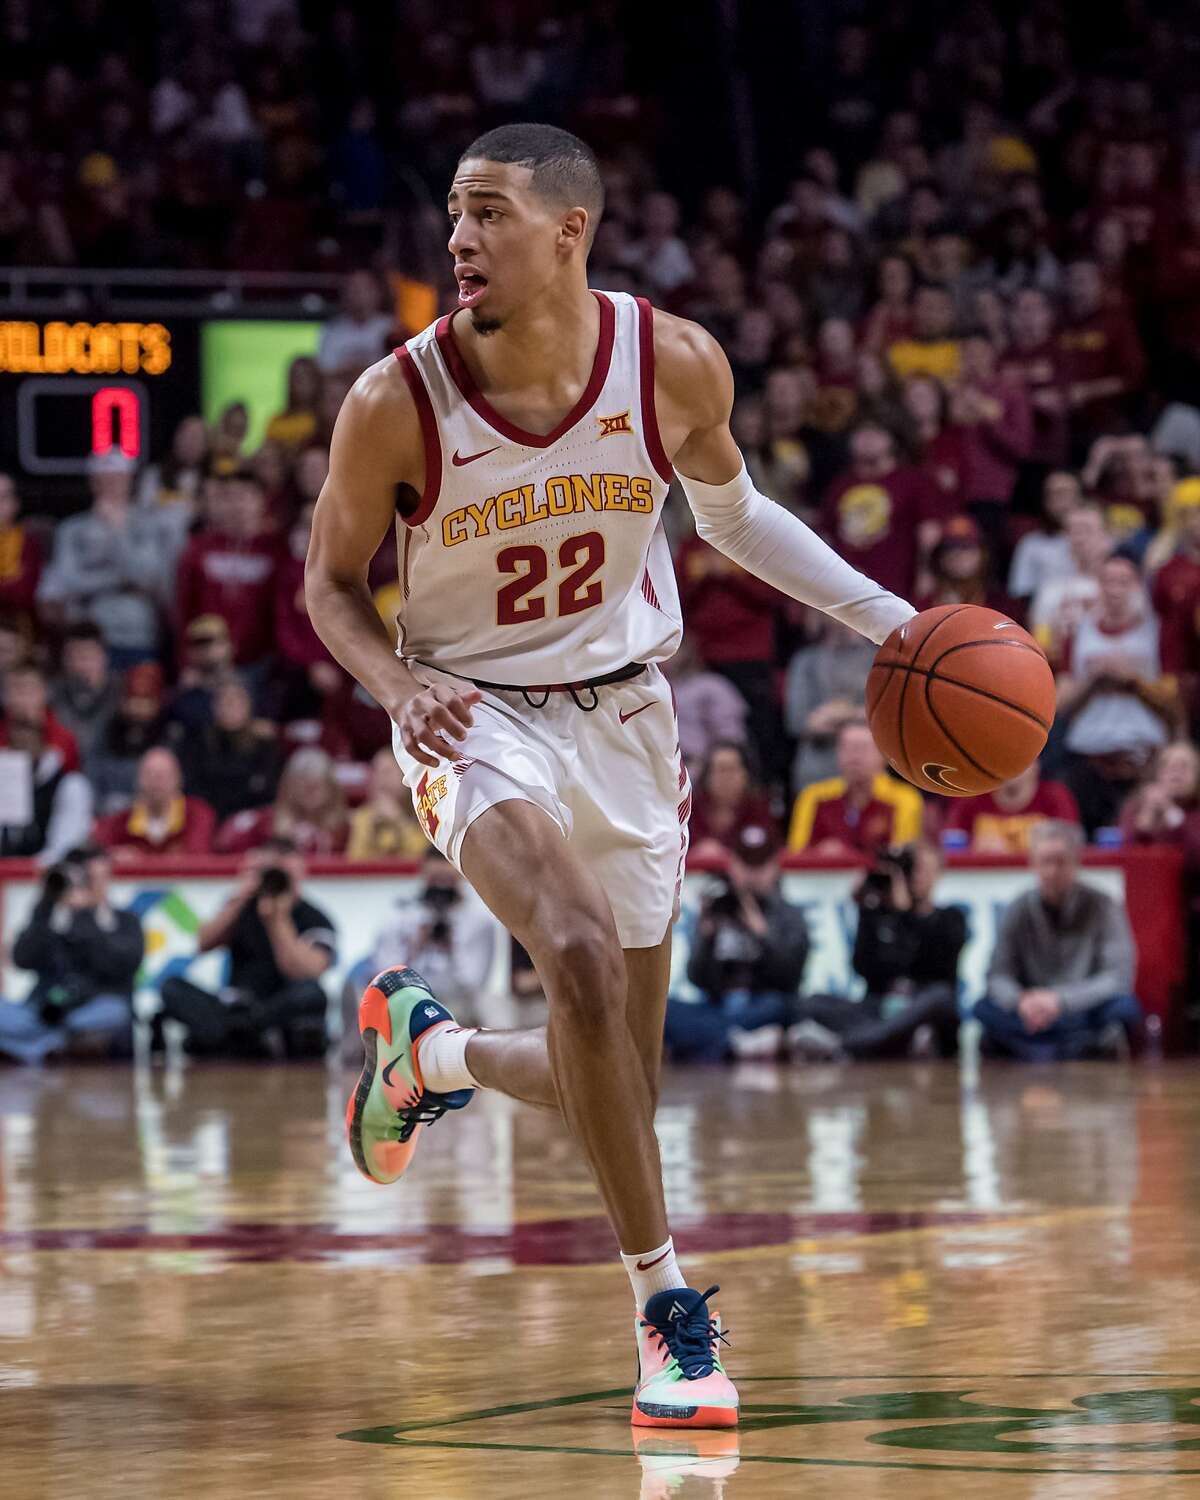 Tyrese Haliburton needed only two seasons at Iowa State to go from little-known recruit to likely NBA lottery pick.